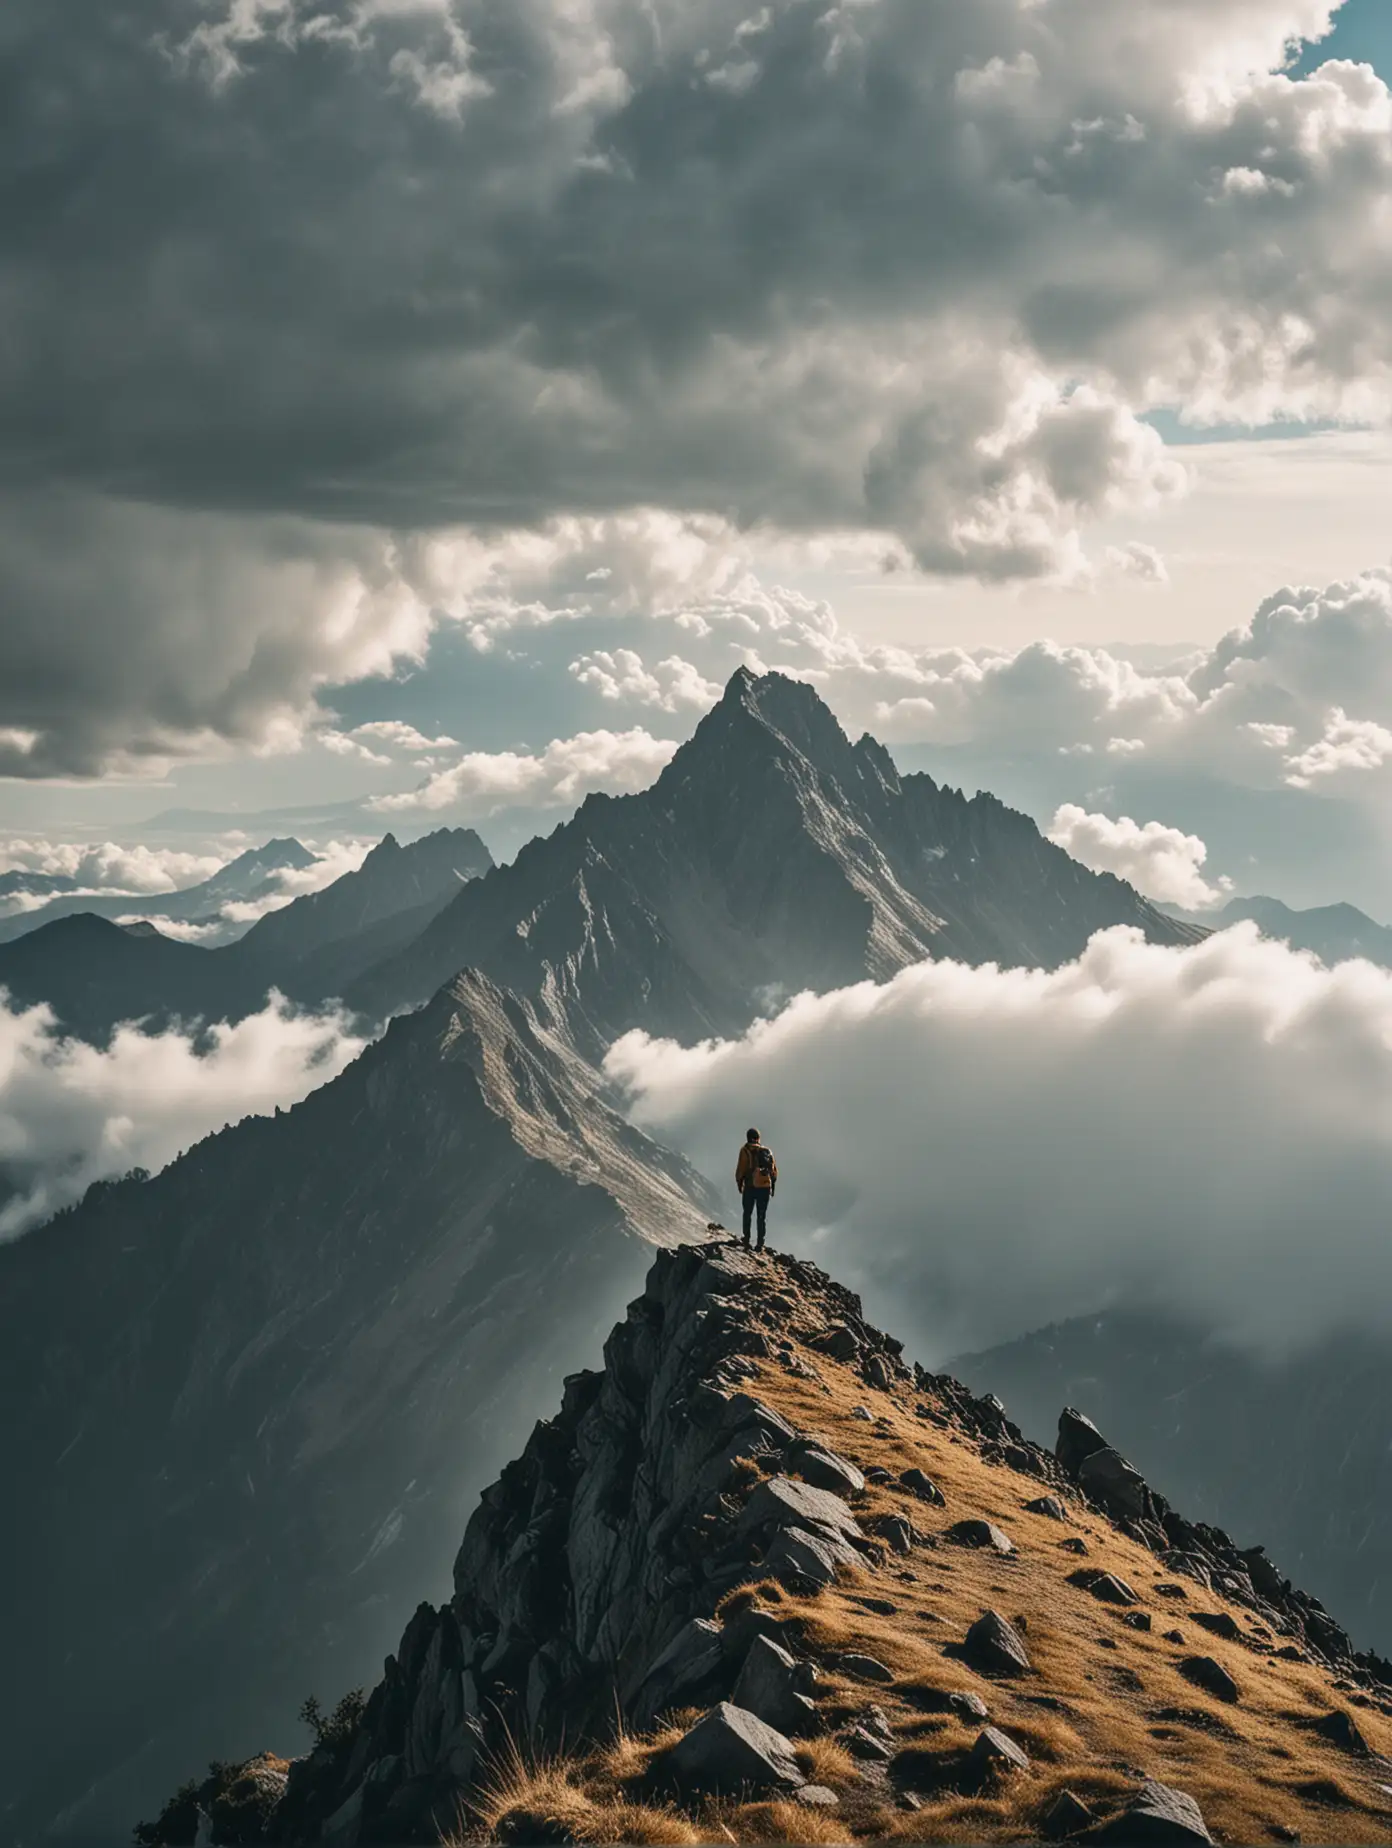 Man Standing on Mountain Peak Amidst Clouds in Analog Landscape Photography